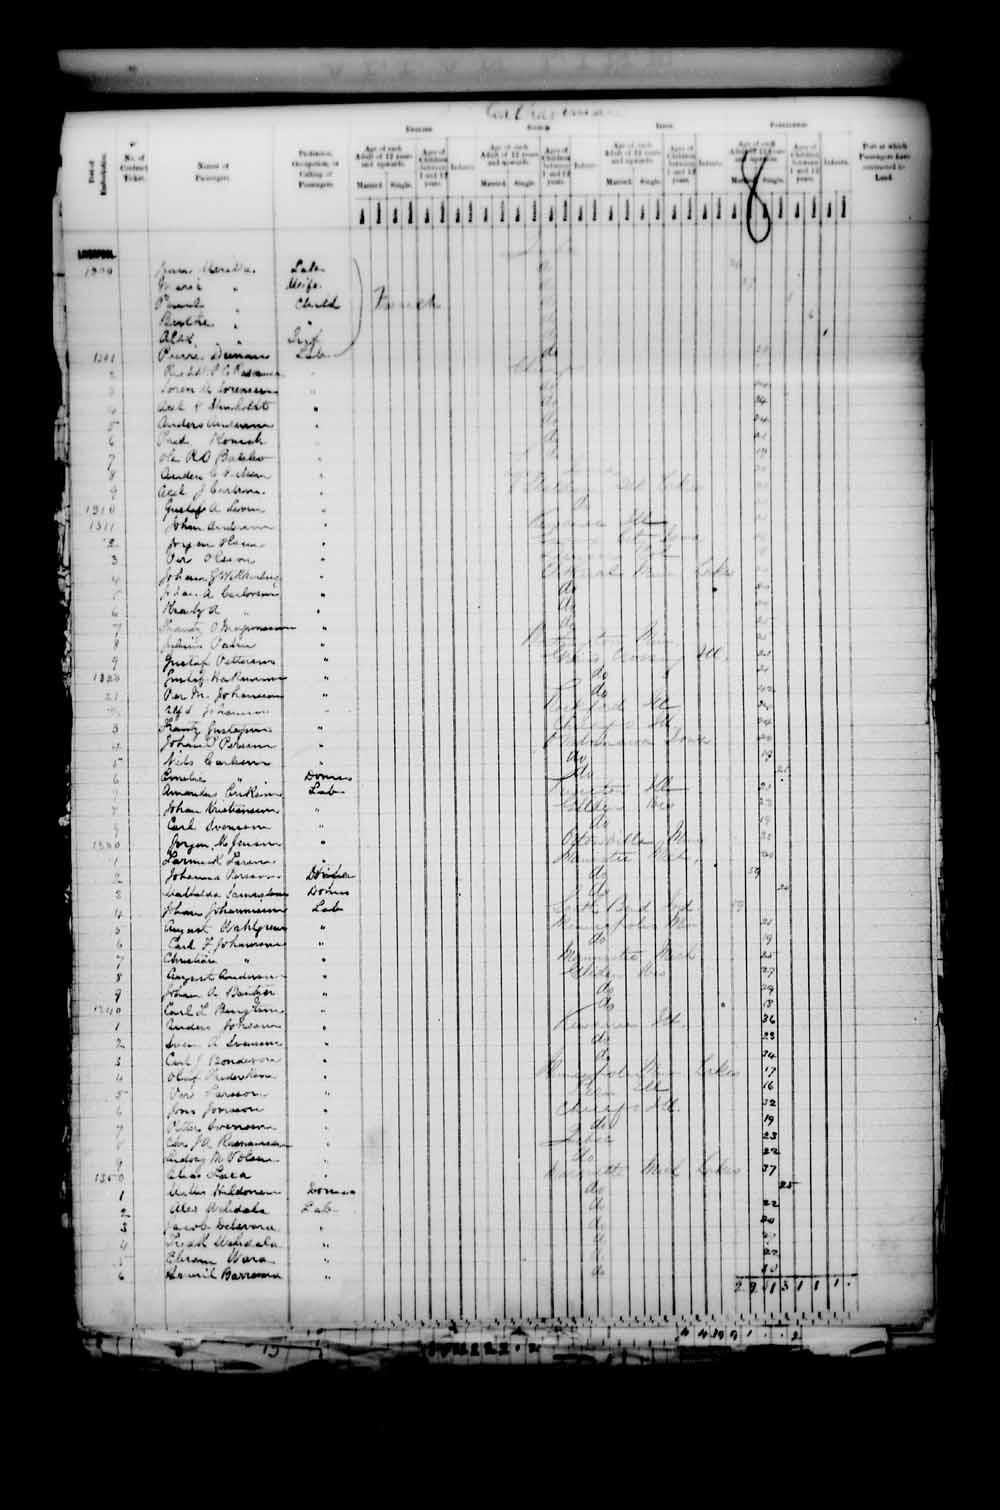 Digitized page of Passenger Lists for Image No.: e003546734